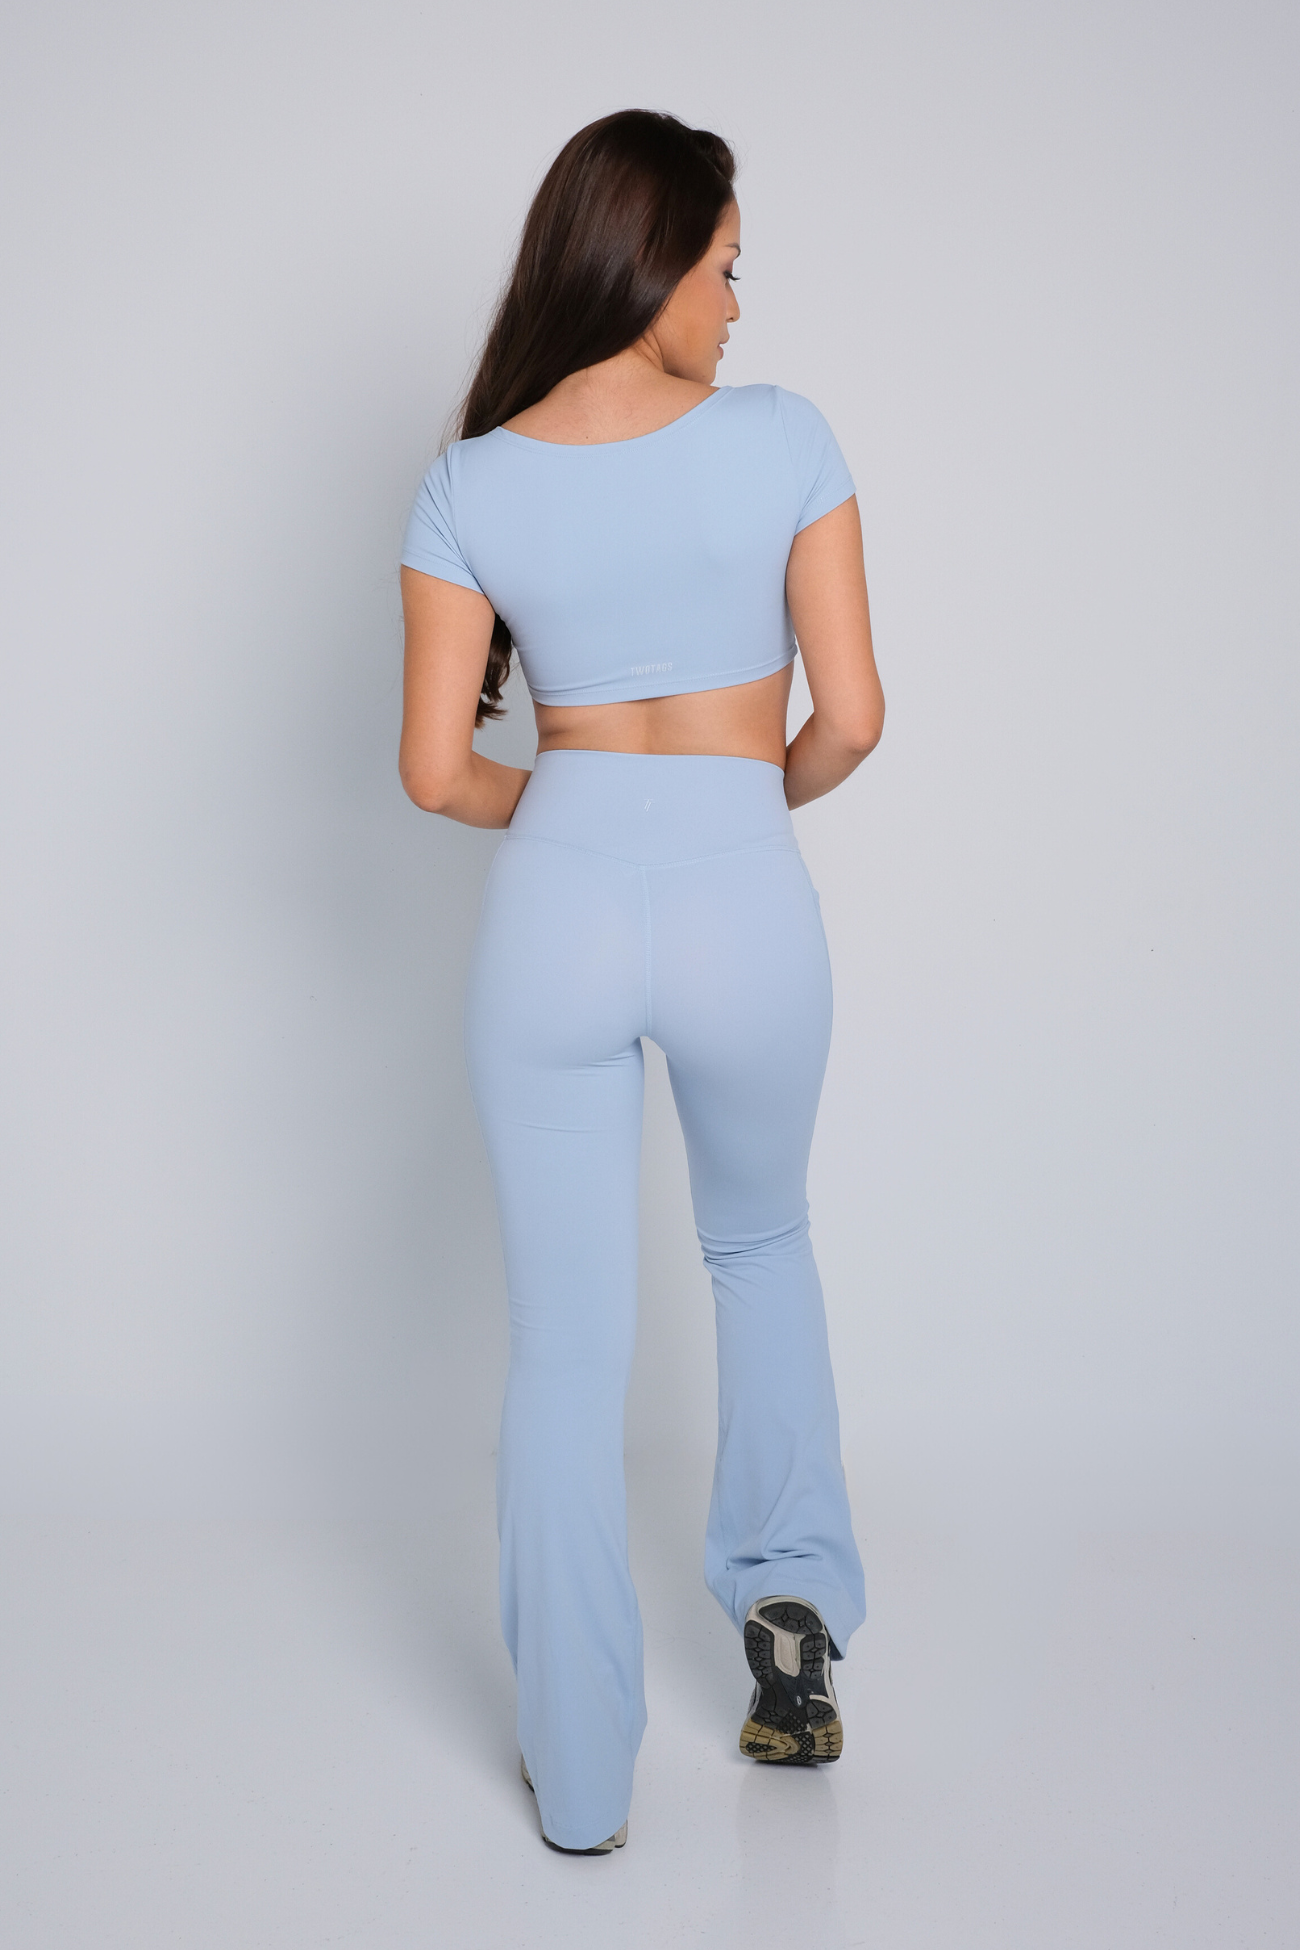 Ruched Crop Top - Baby Blue